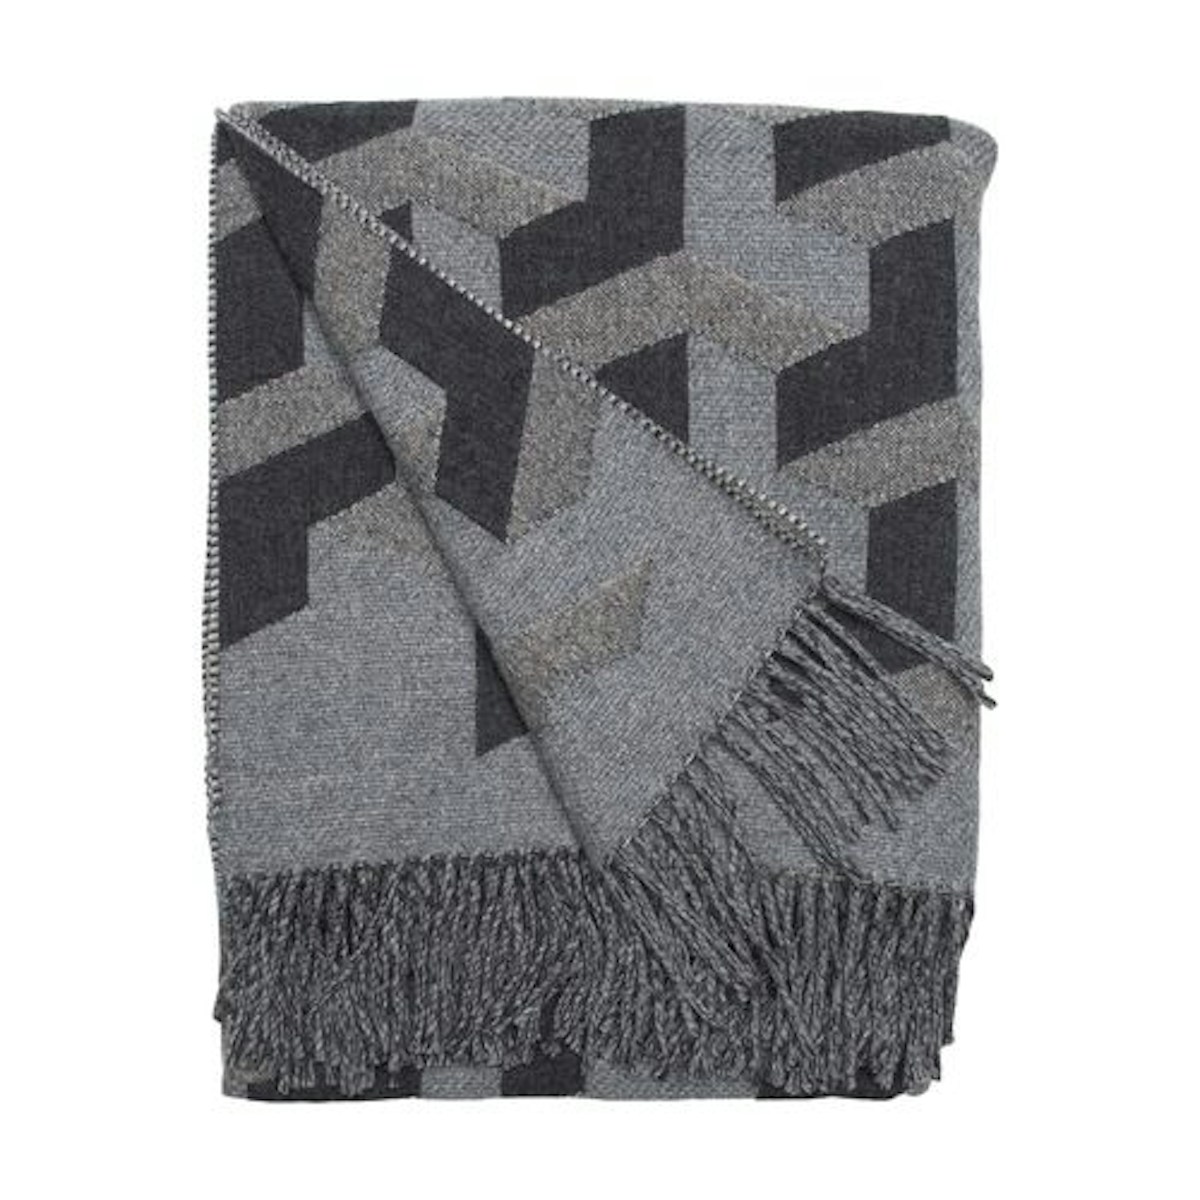 Monochrome Triolux Sivill Throw - 9 Best Luxury Throws & Blankets to Buy for your Home - Style Guide - LuxDeco.com